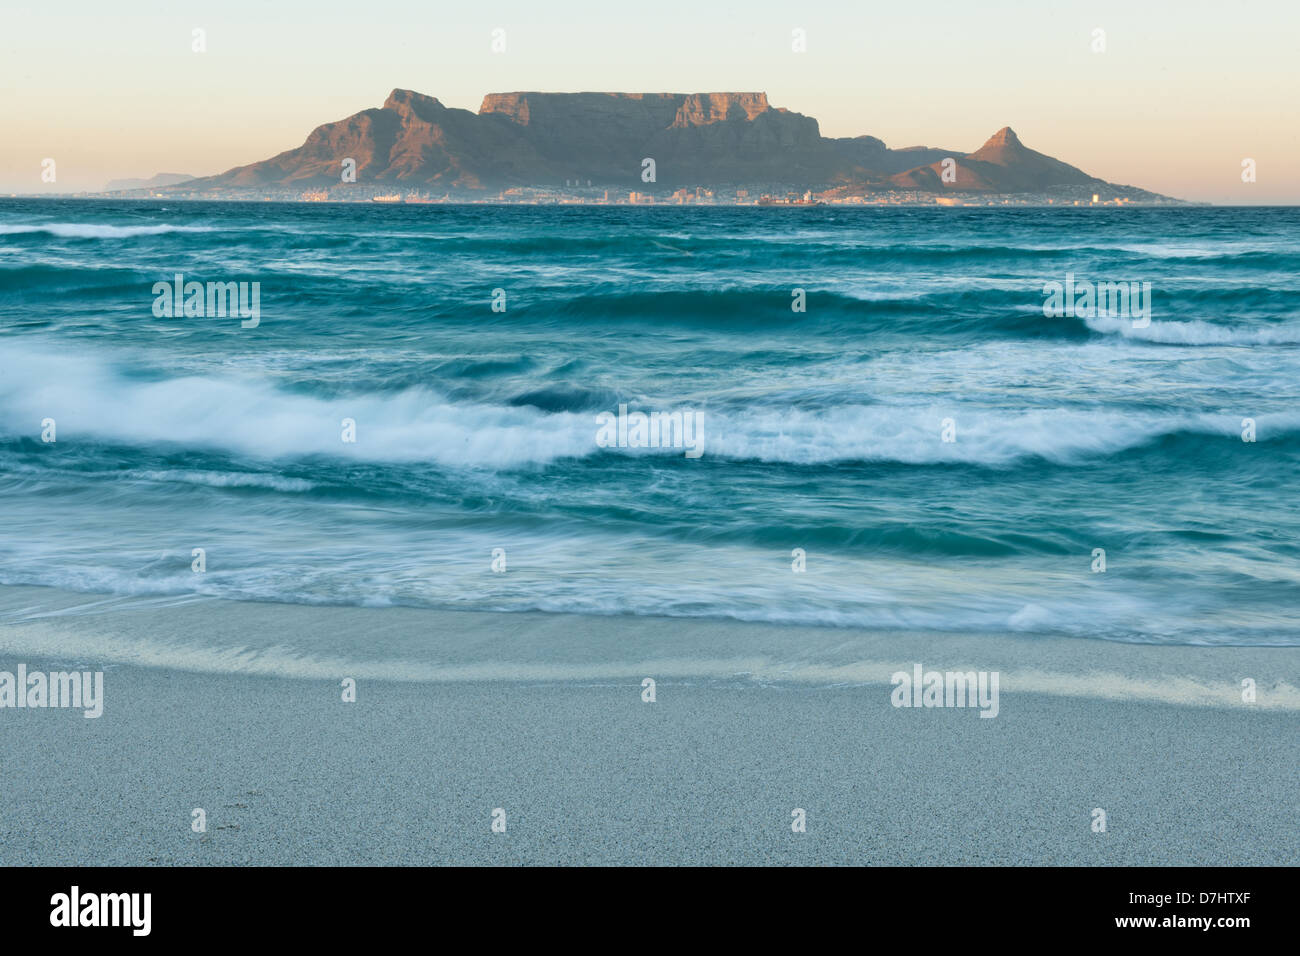 View of Table Mountain from Bloubergstrand, Cape Town, south Africa Stock Photo